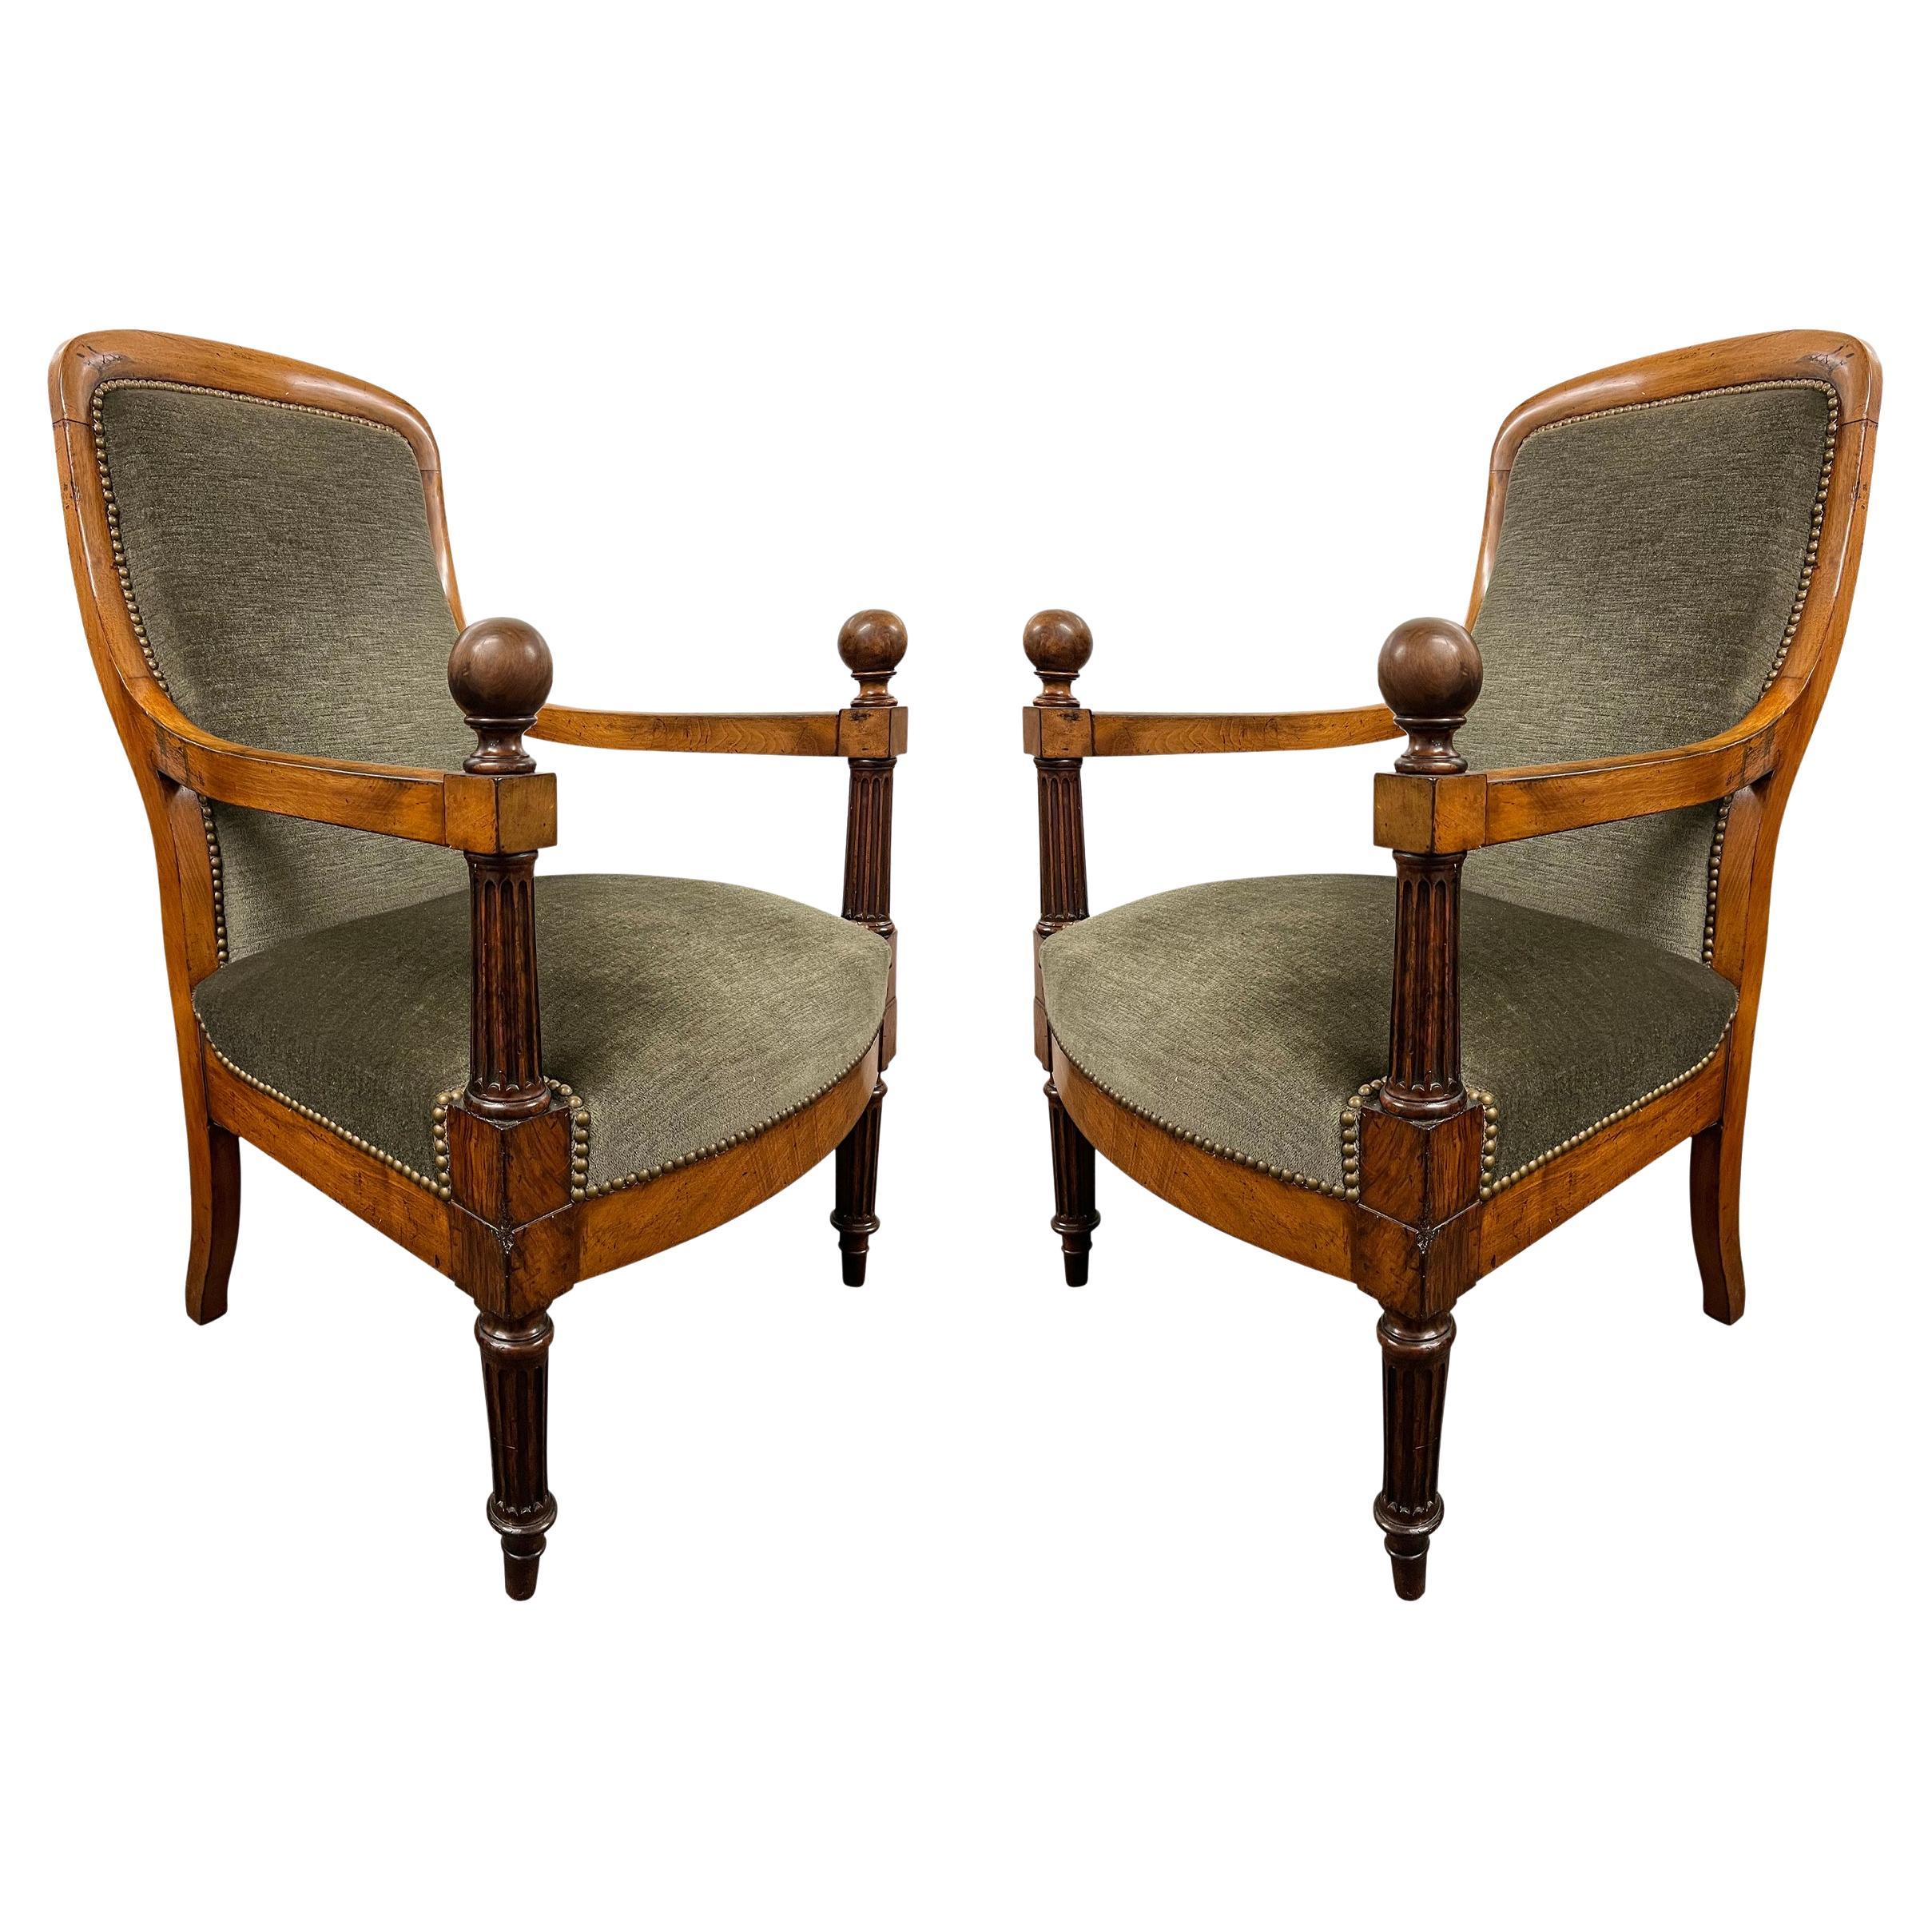 Pair of Early 19th Century English Regency Armchairs For Sale